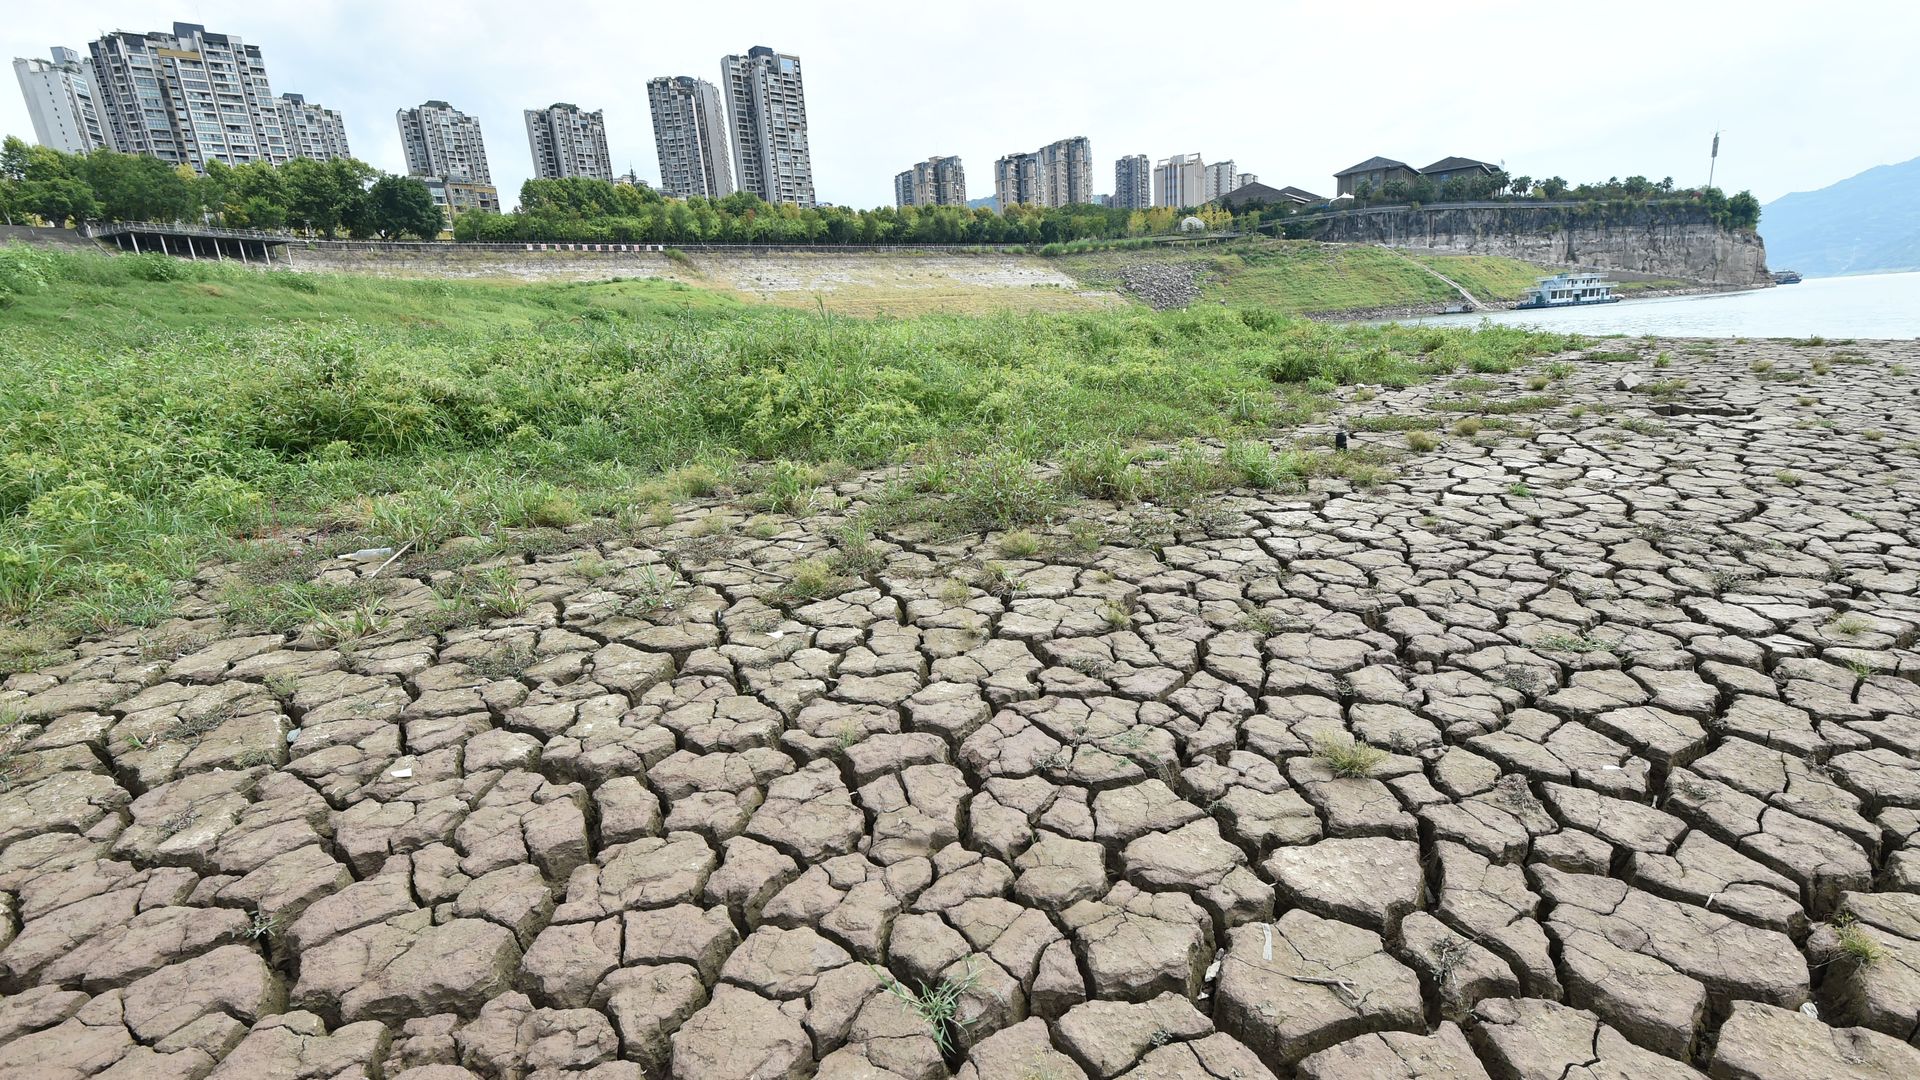 A view of the riverbed revealed after the water level dropped in the Yangtze River in Yunyang county in southwest China's Chongqing Municipality Tuesday, Aug. 16, 2022